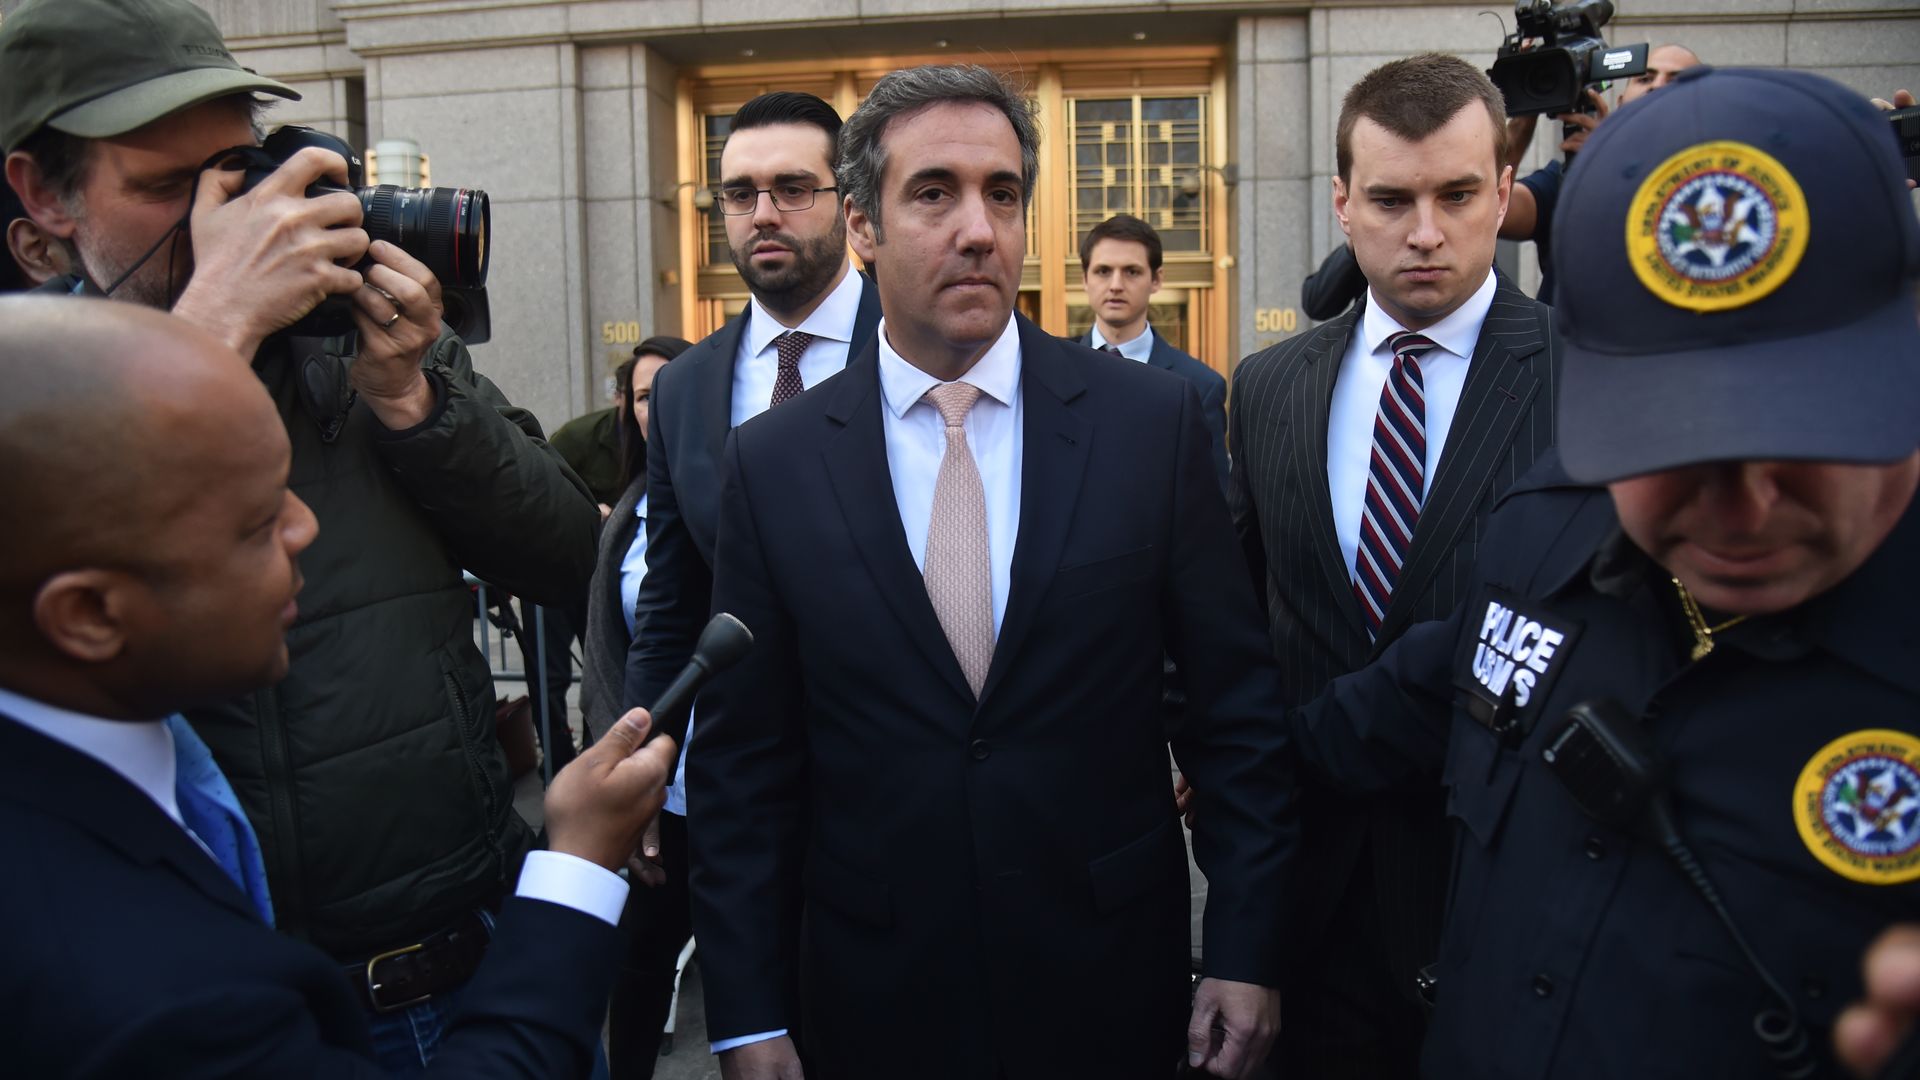 Cohen surrounded by camera and security after leaving a NY courthouse